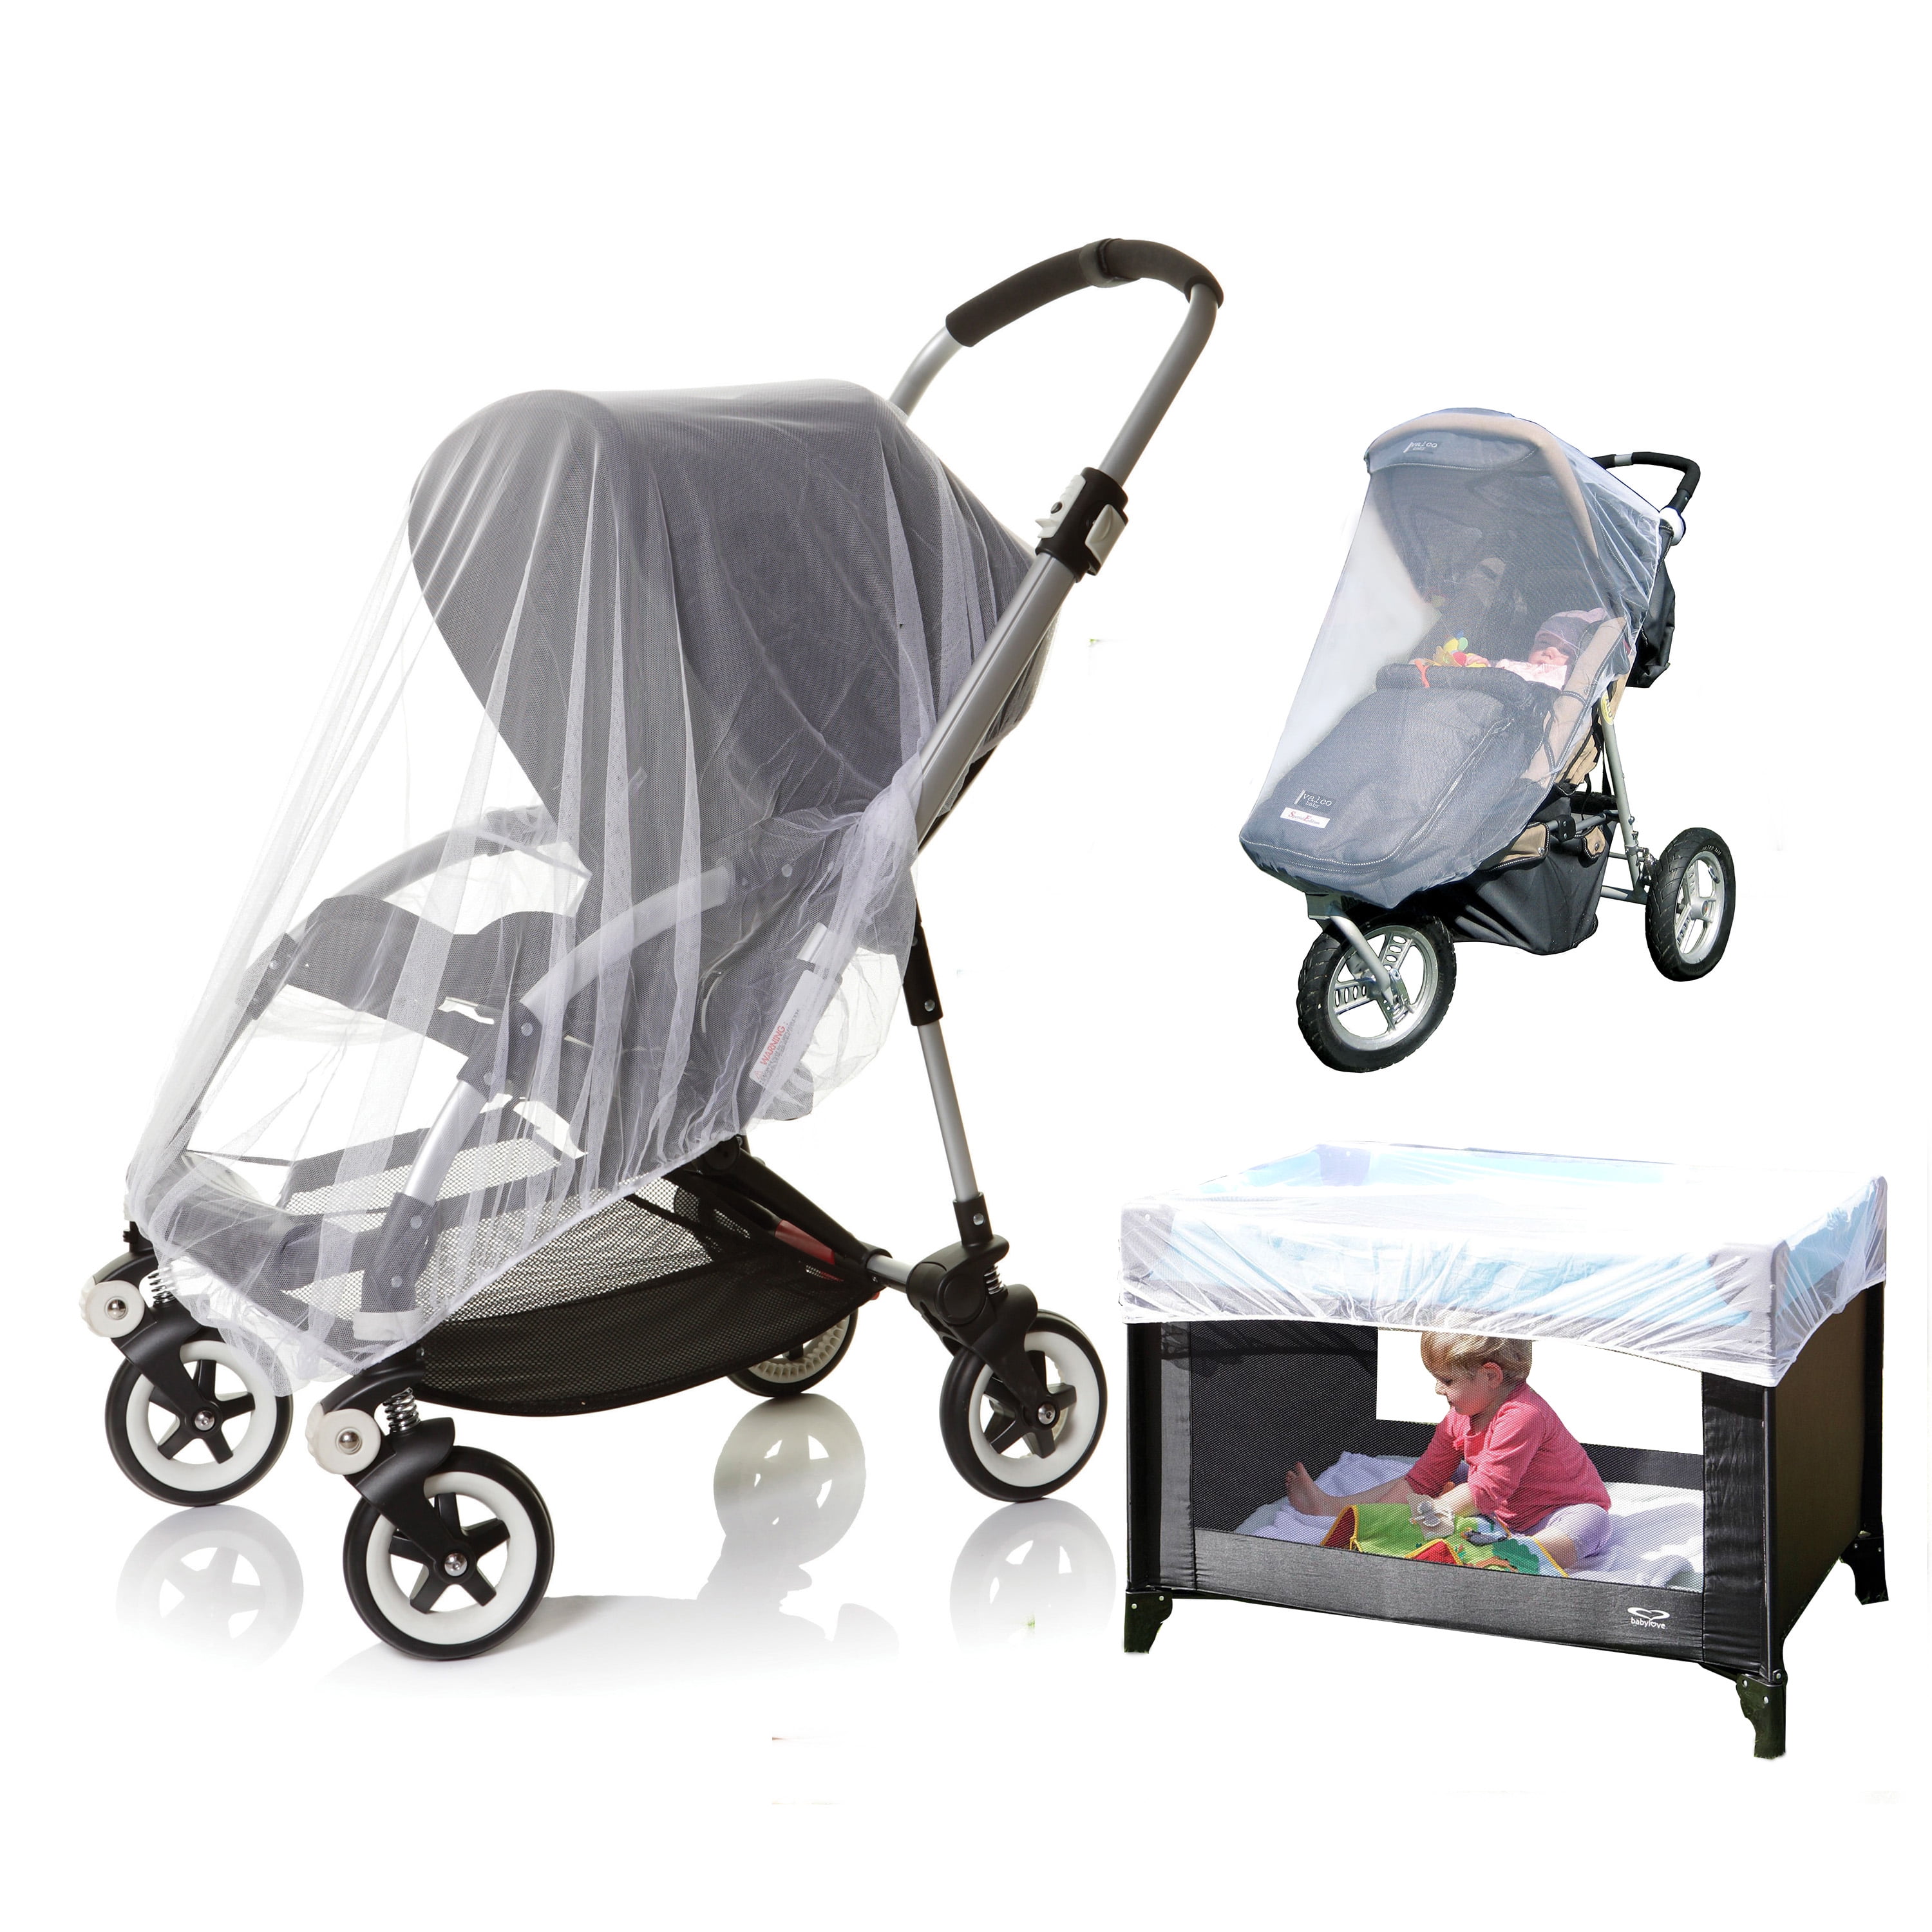 Dreambaby Stroller and Crib Insect Netting - Stroller Accessories - Mosquito Protection Cover for Baby - 1 - Walmart.com